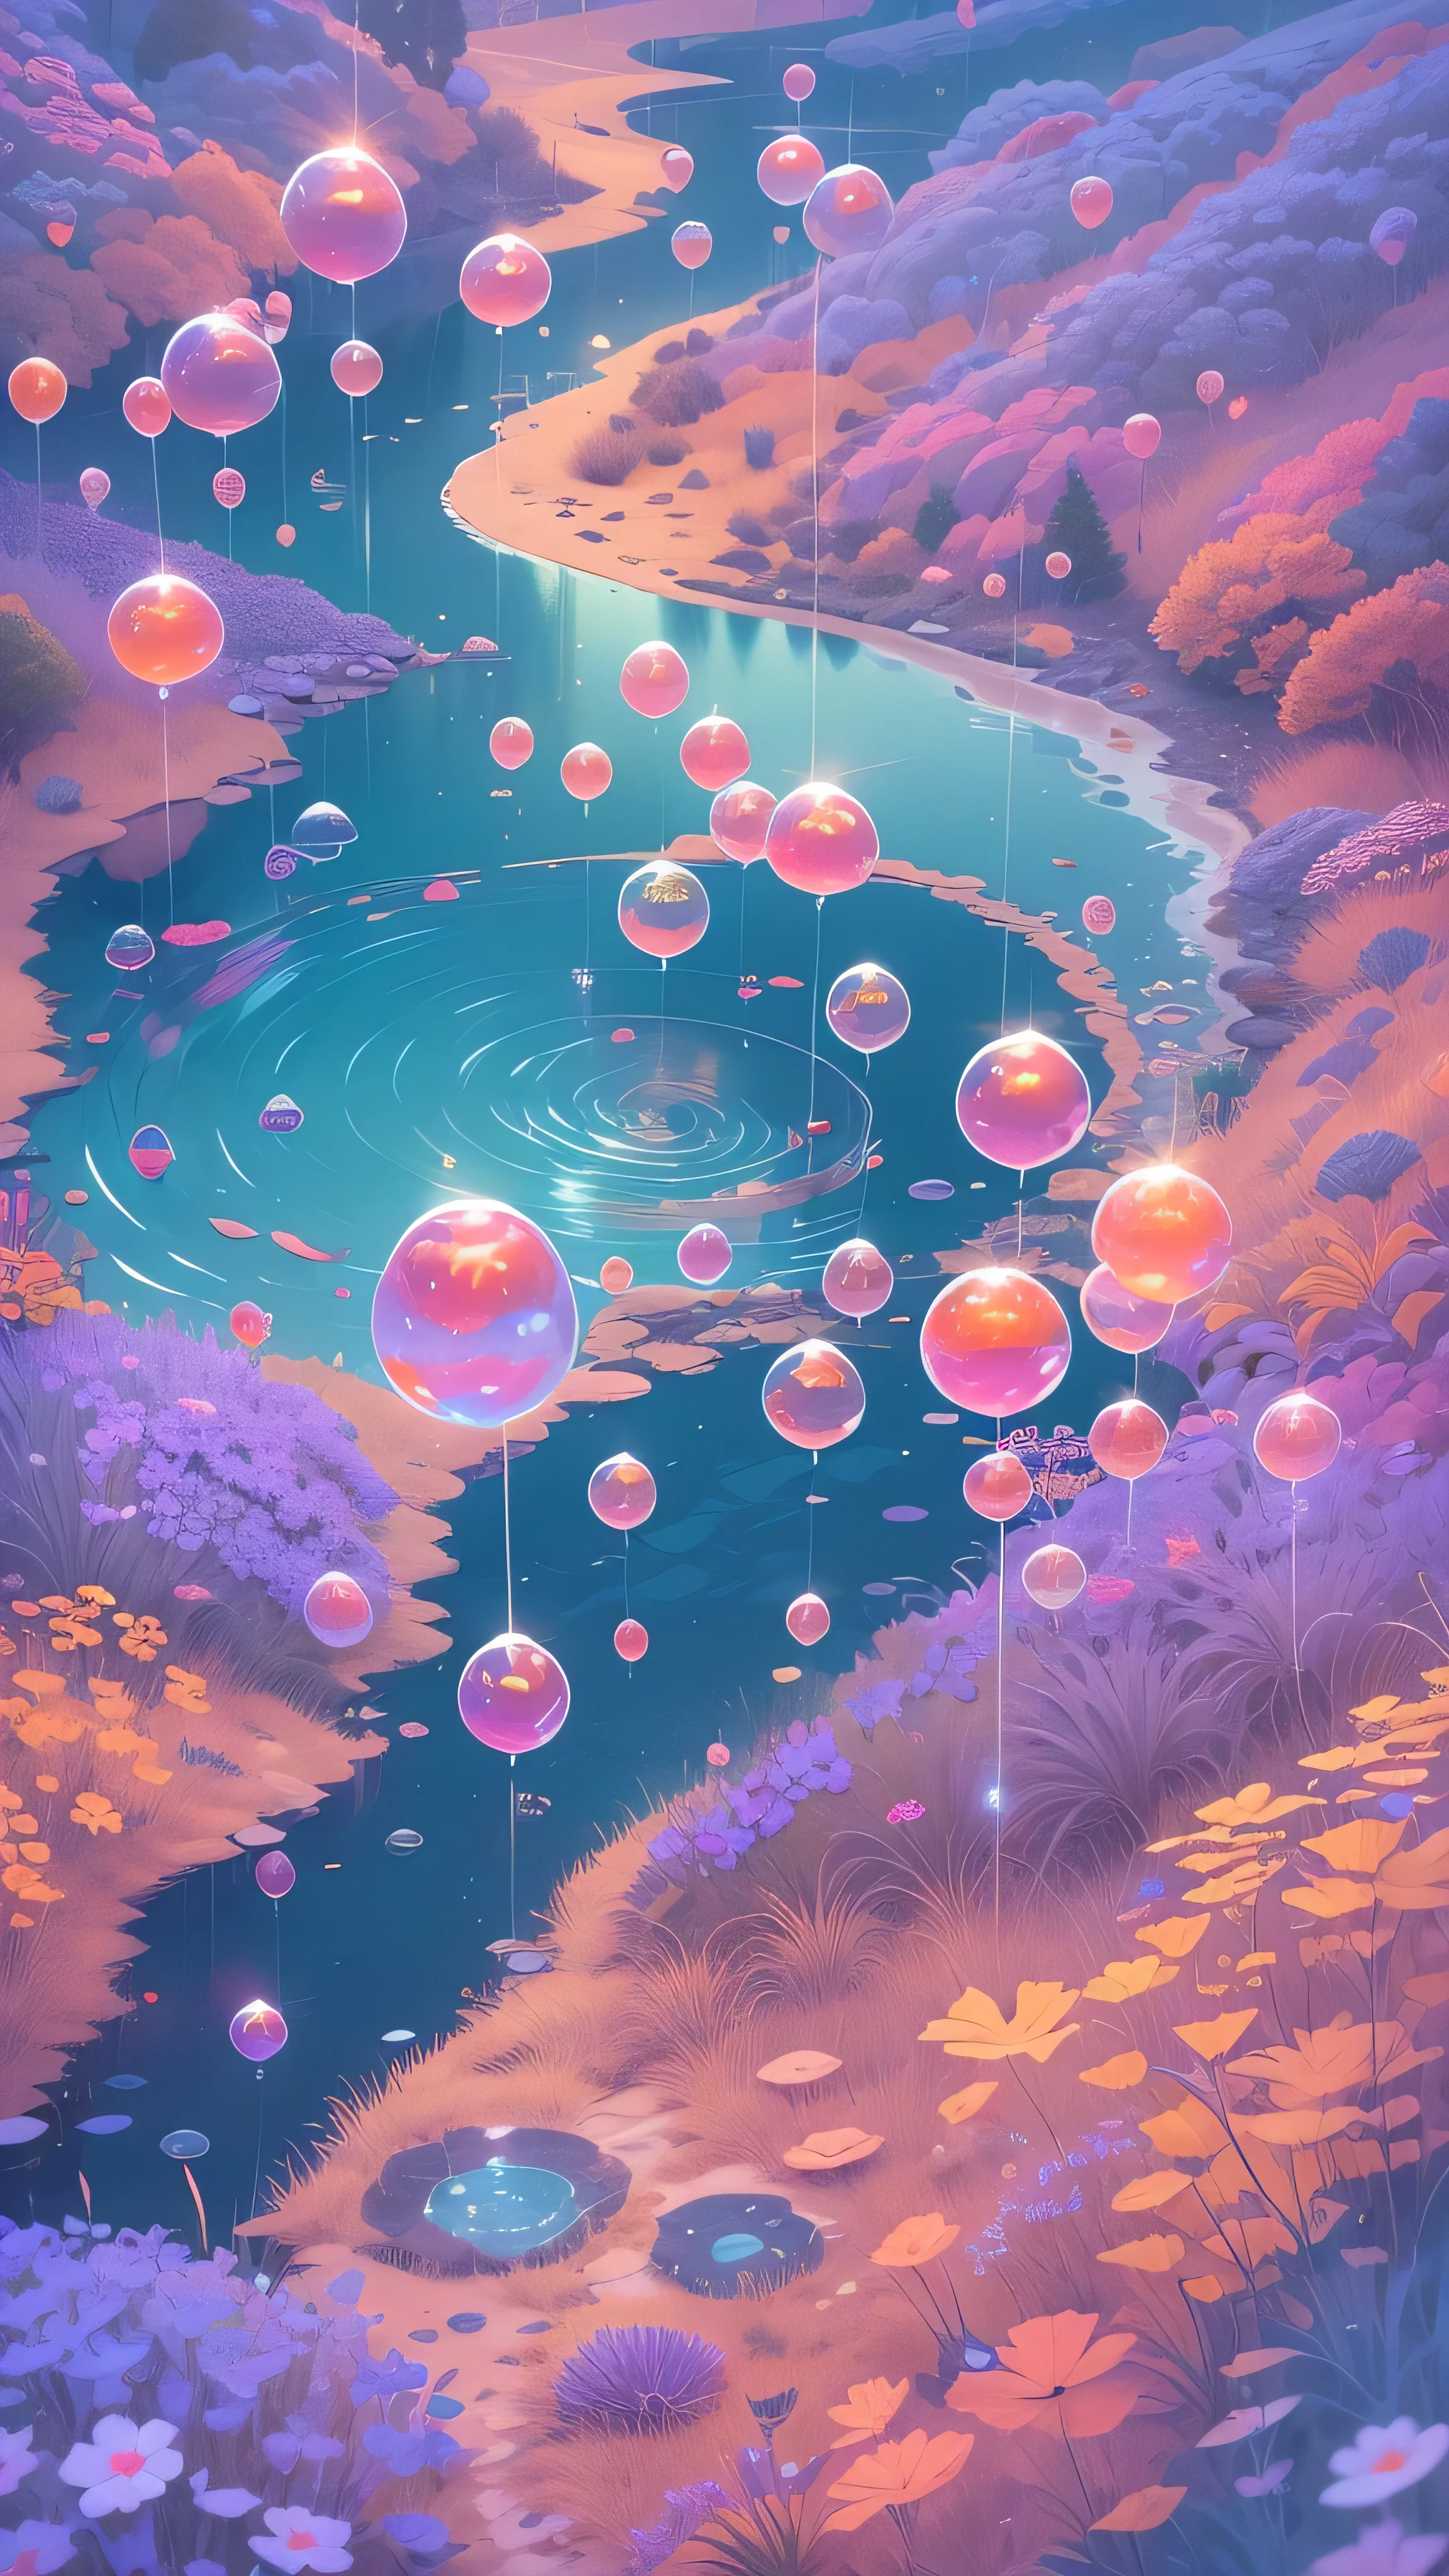 Distant view of the lake,Super cute slime,Reflects light,Colorful bubbles,Magical Lake,Super detailed,Highest quality,Soft lighting, Fantasy Style, Vibrant colors